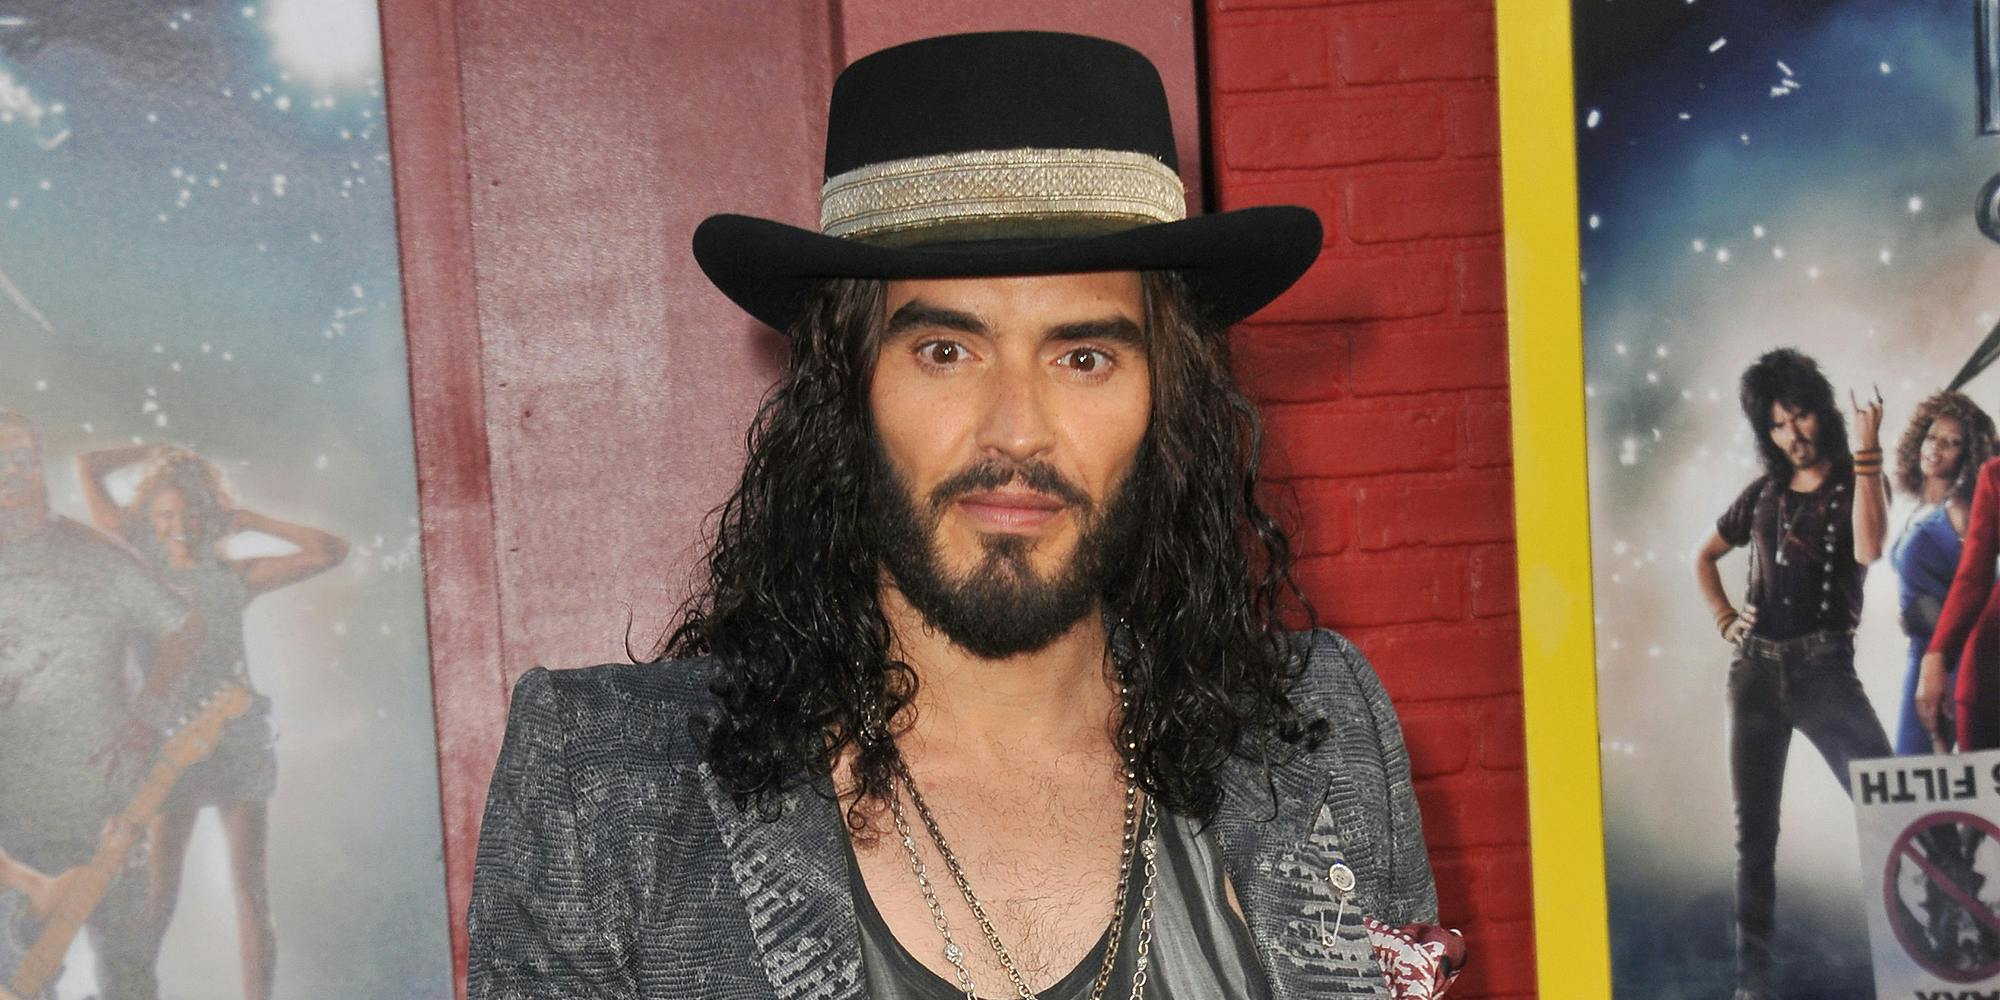 YouTube demonetizes Russell Brand's channel